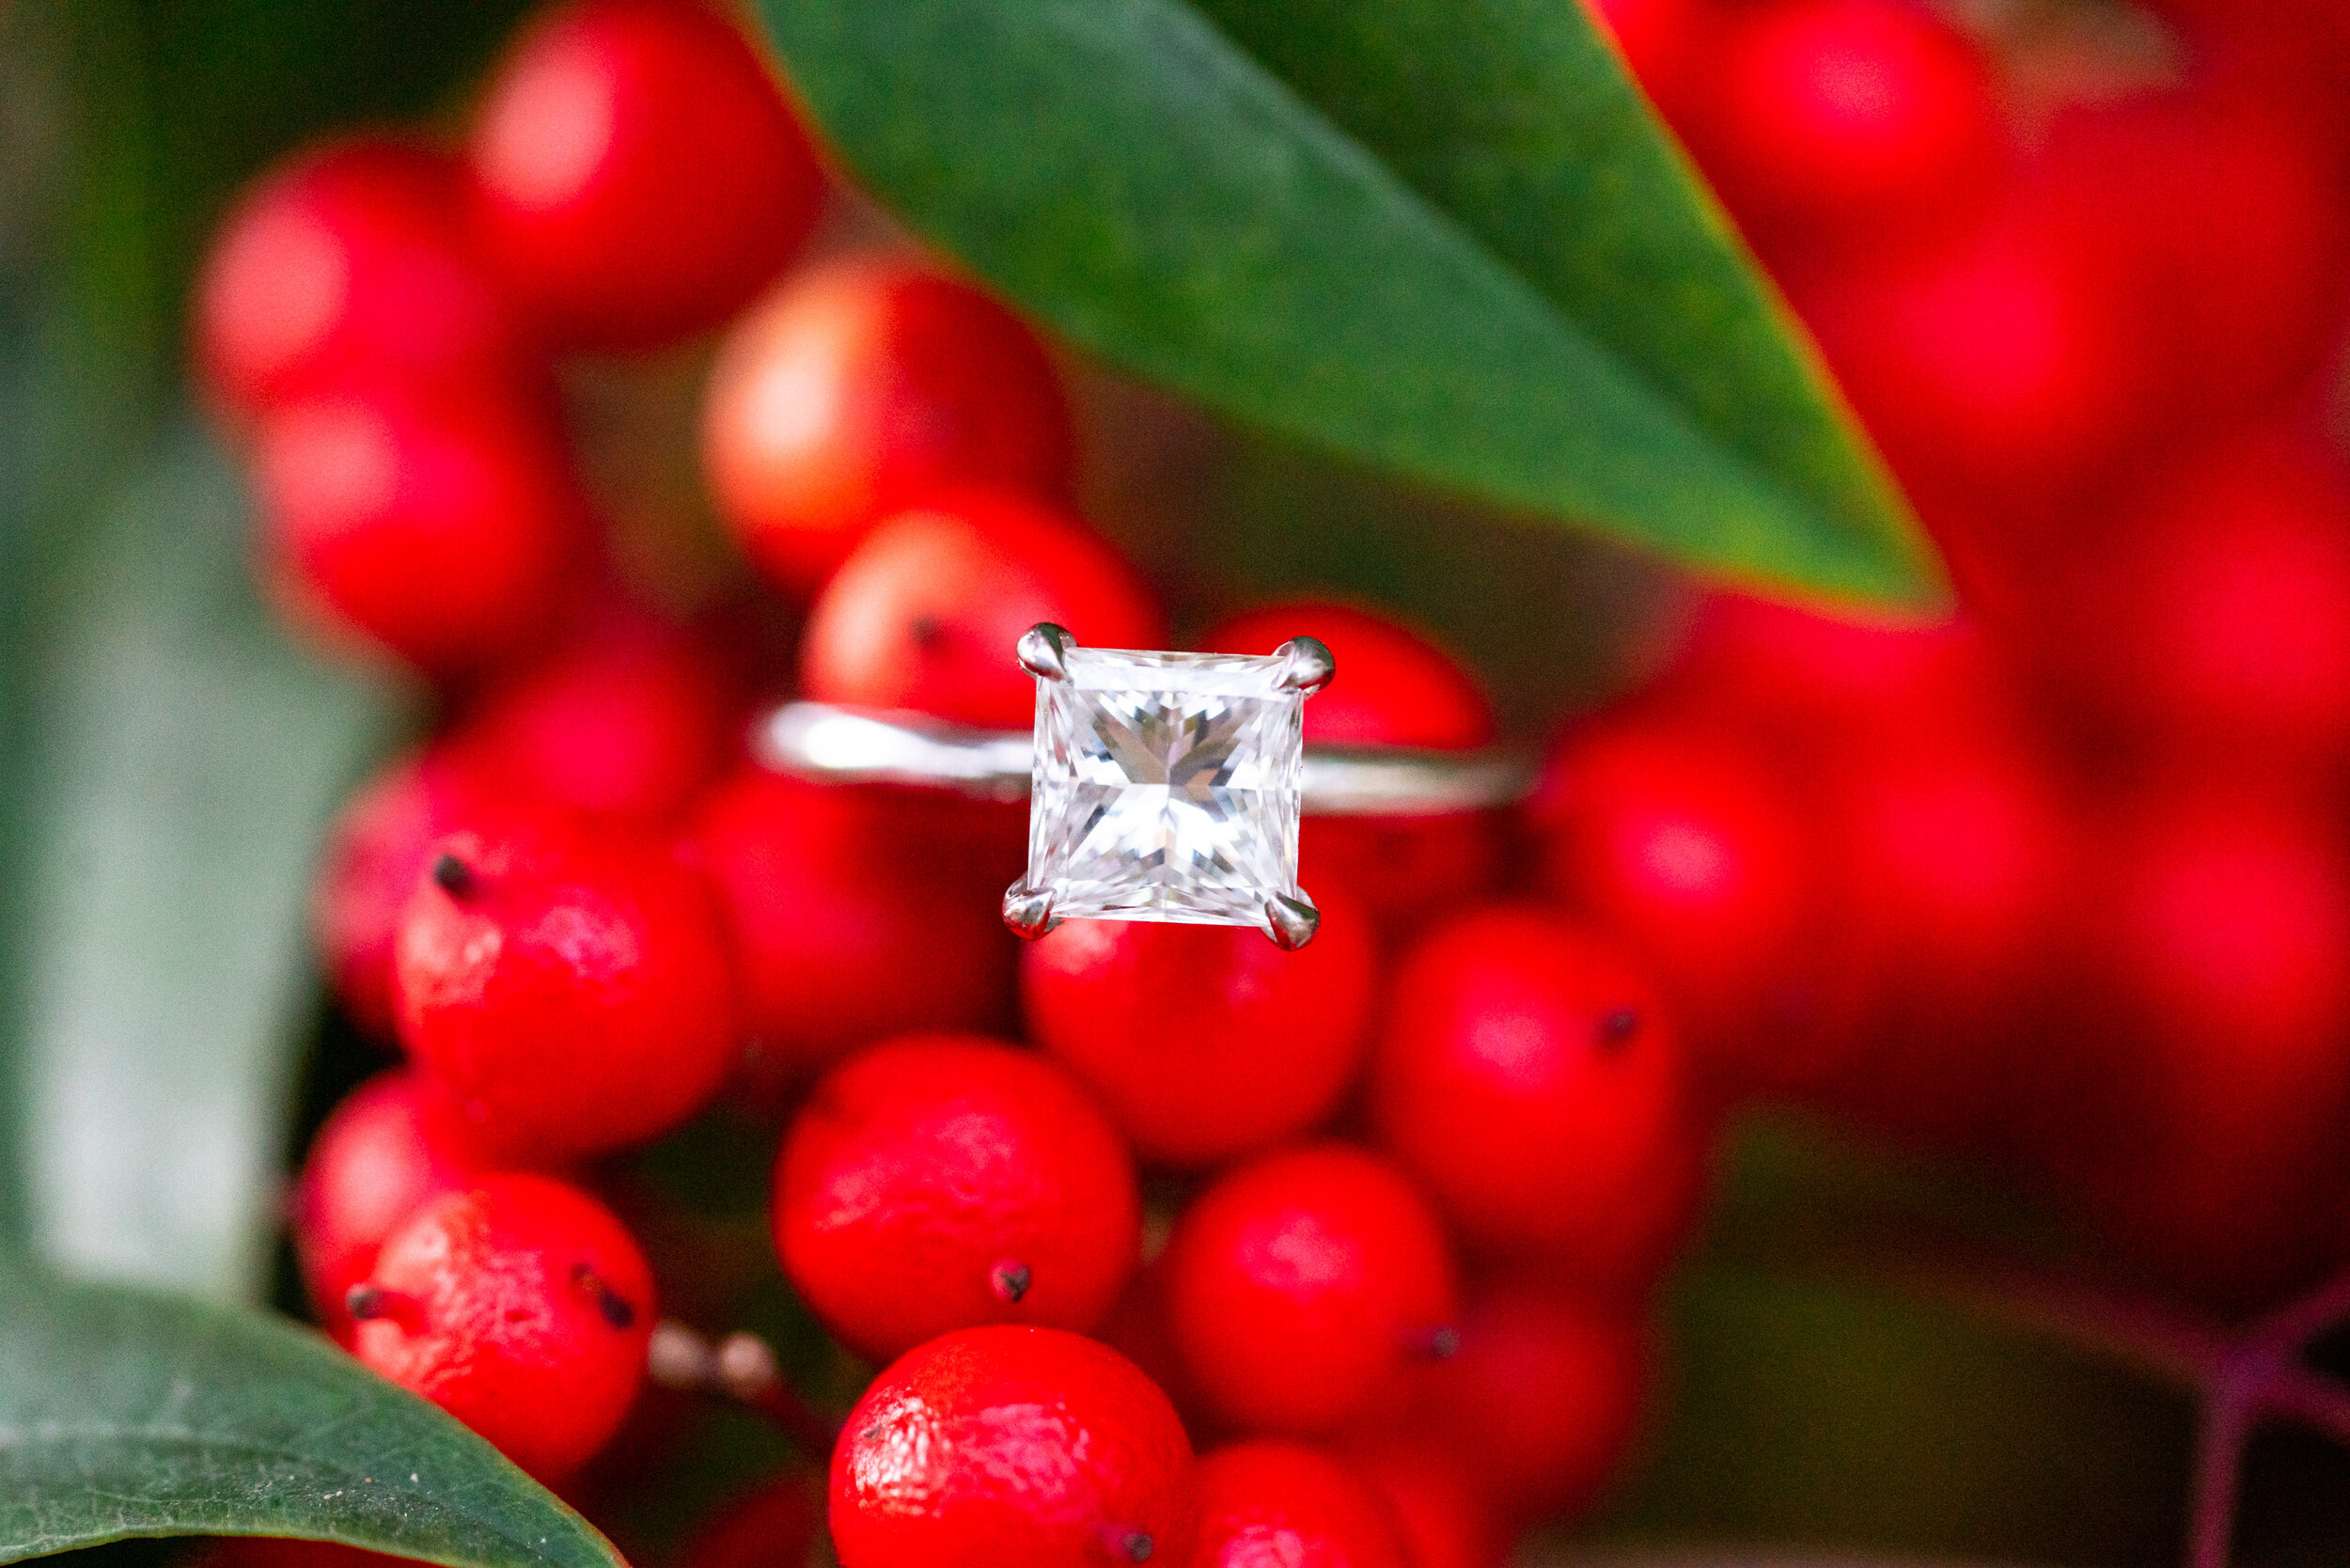 Square princess cut engagement ring in Christmas holly berries